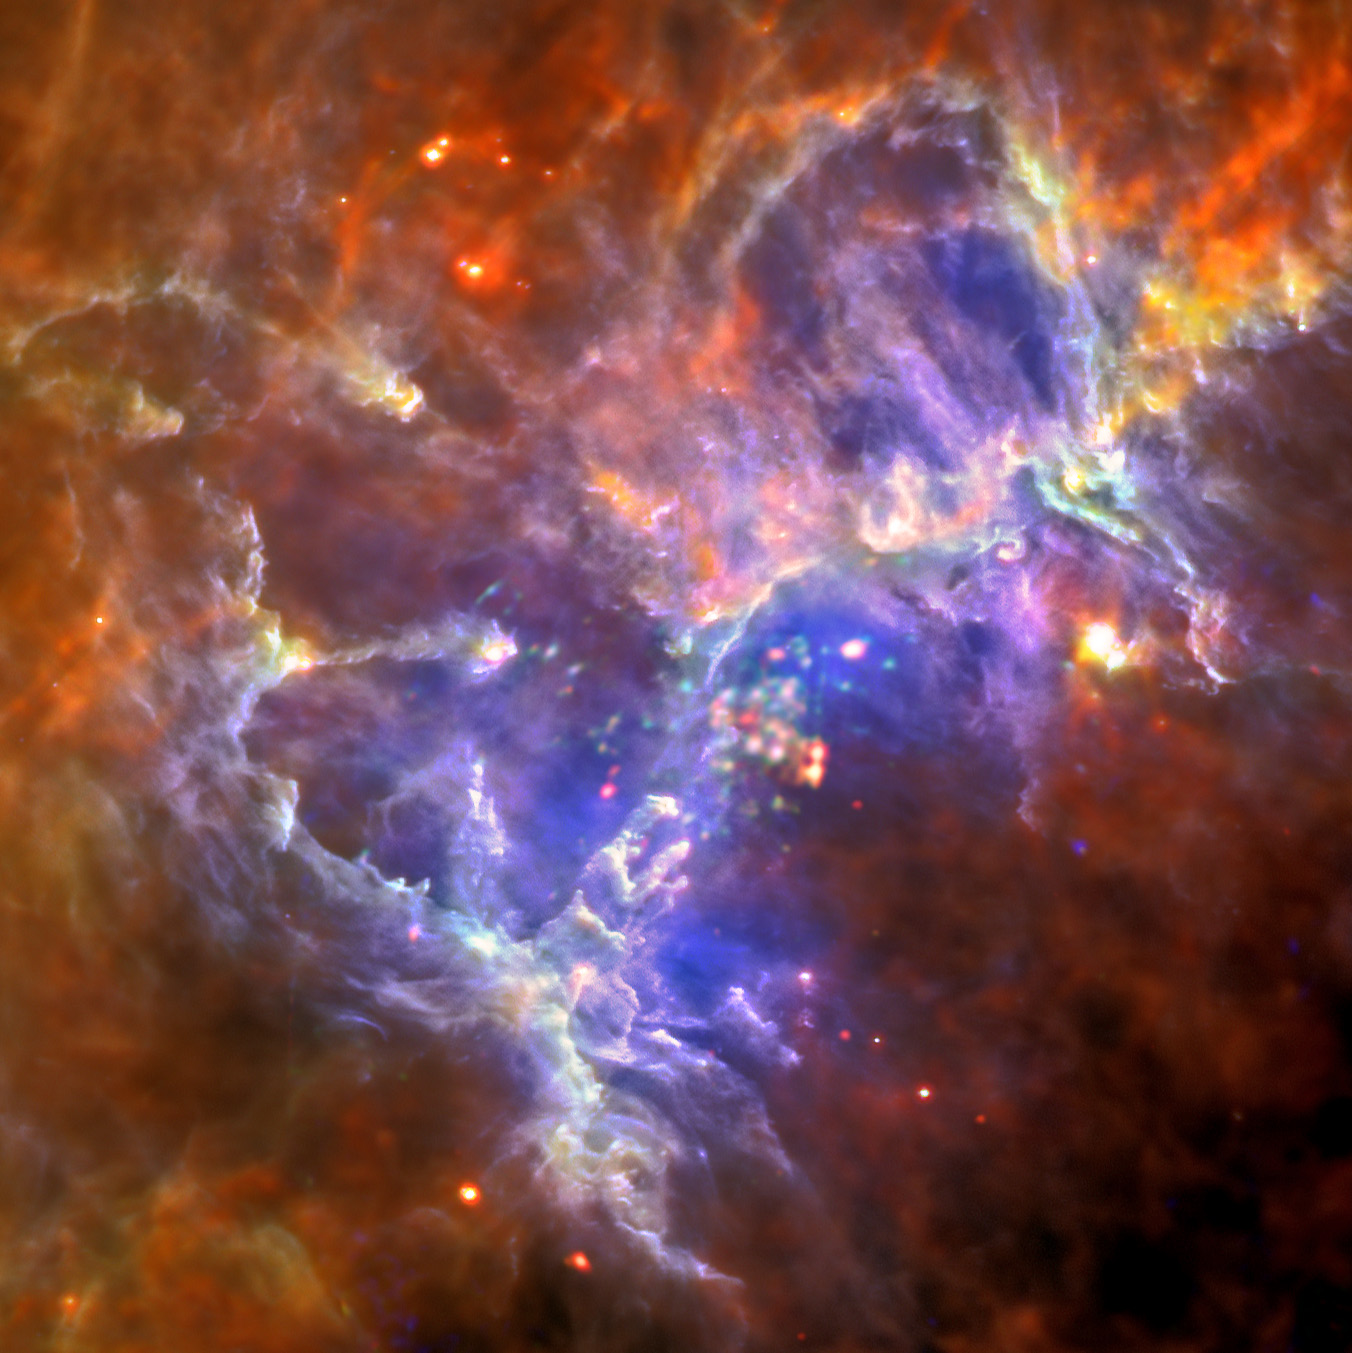 ESA: A Stunning New View of the Eagle Nebula, Courtesy of XMM-Newton and Herschel